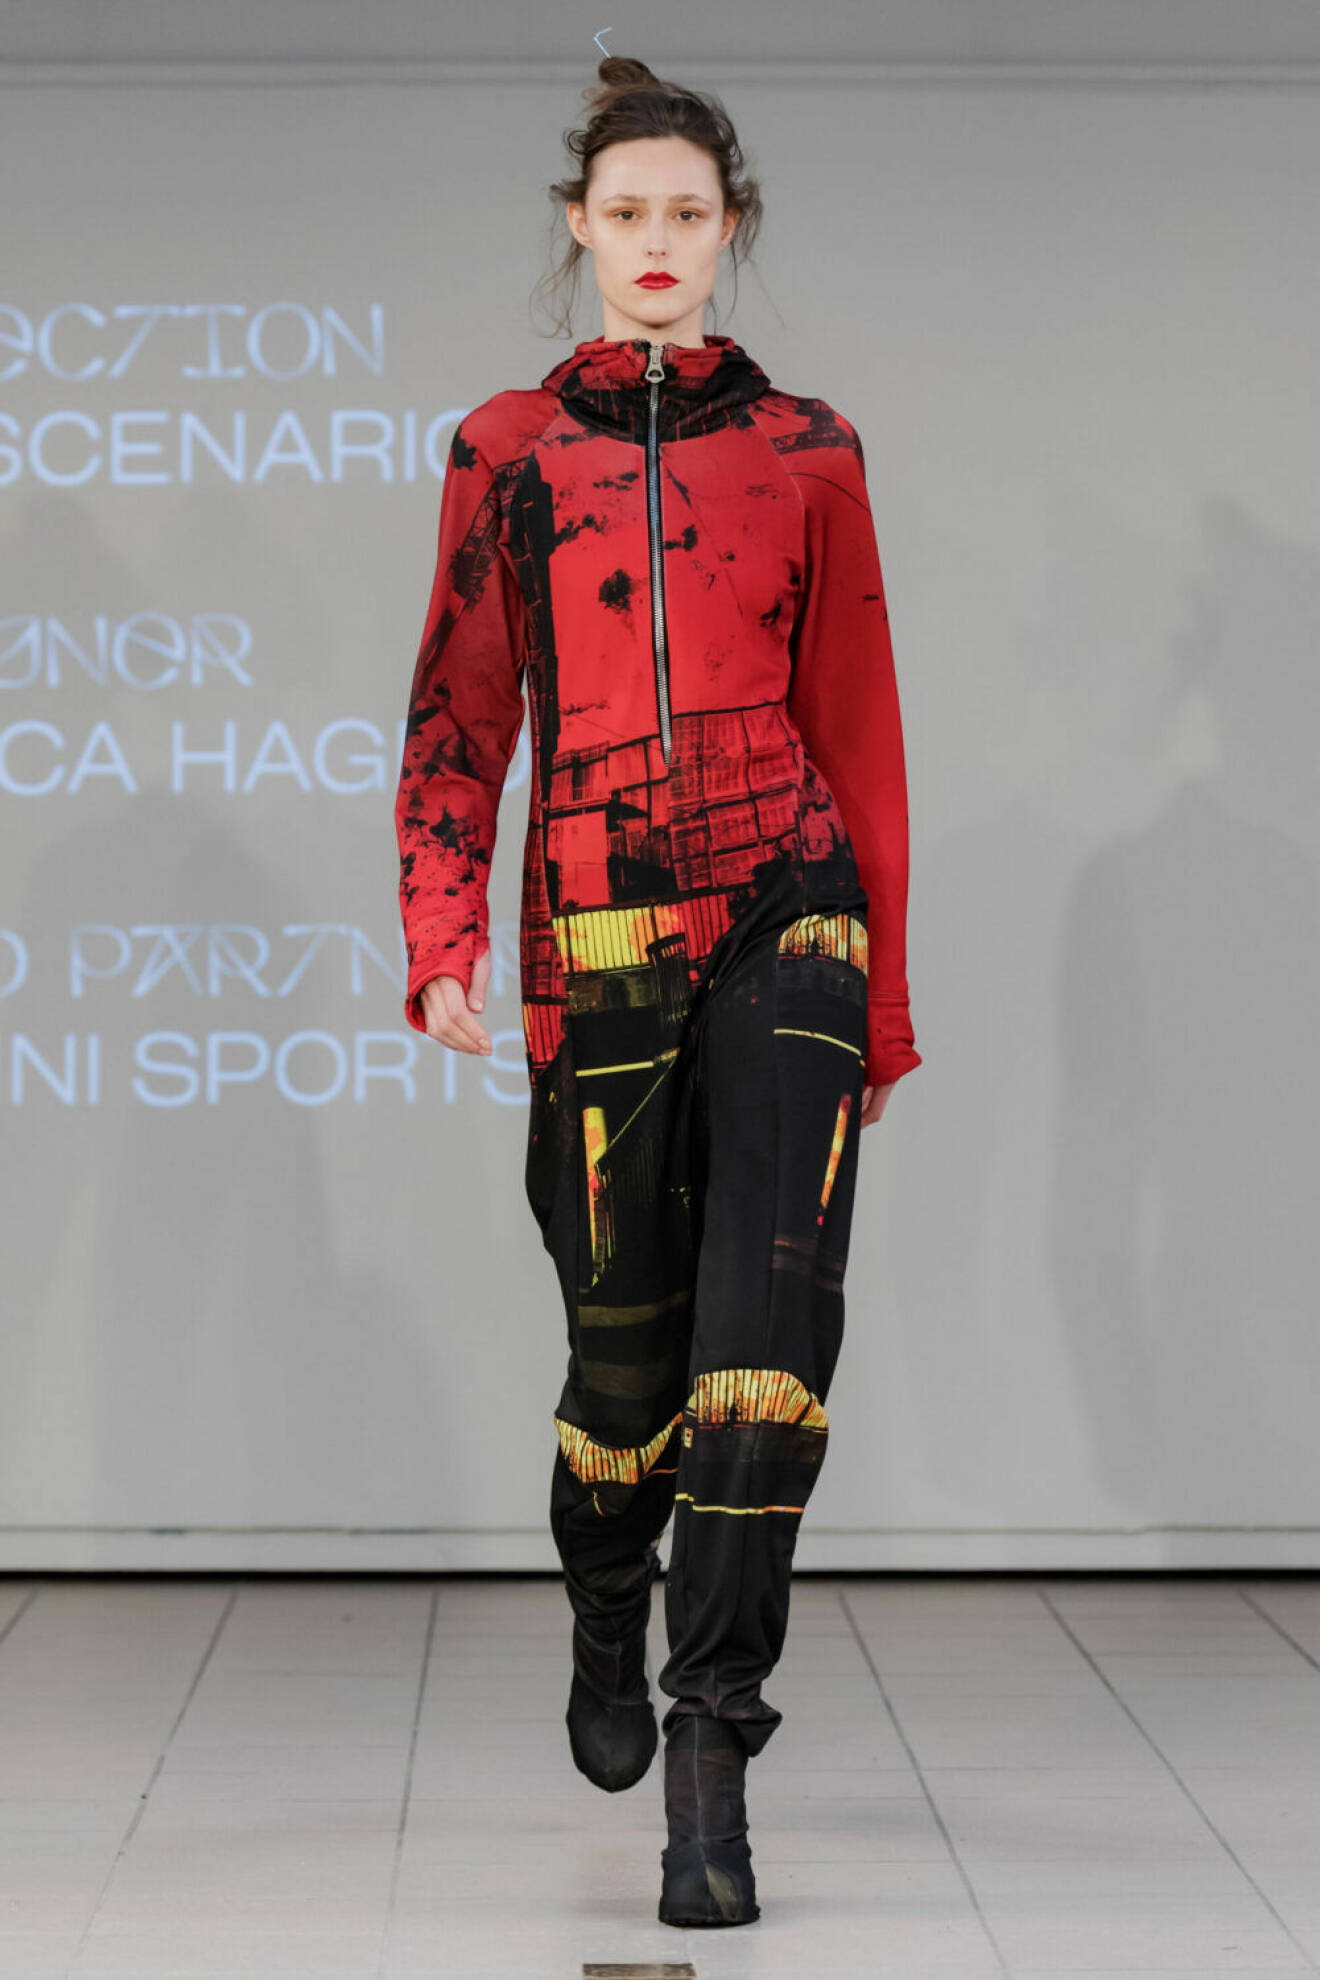 Beckmans collage of fashion AW19, röd overall.